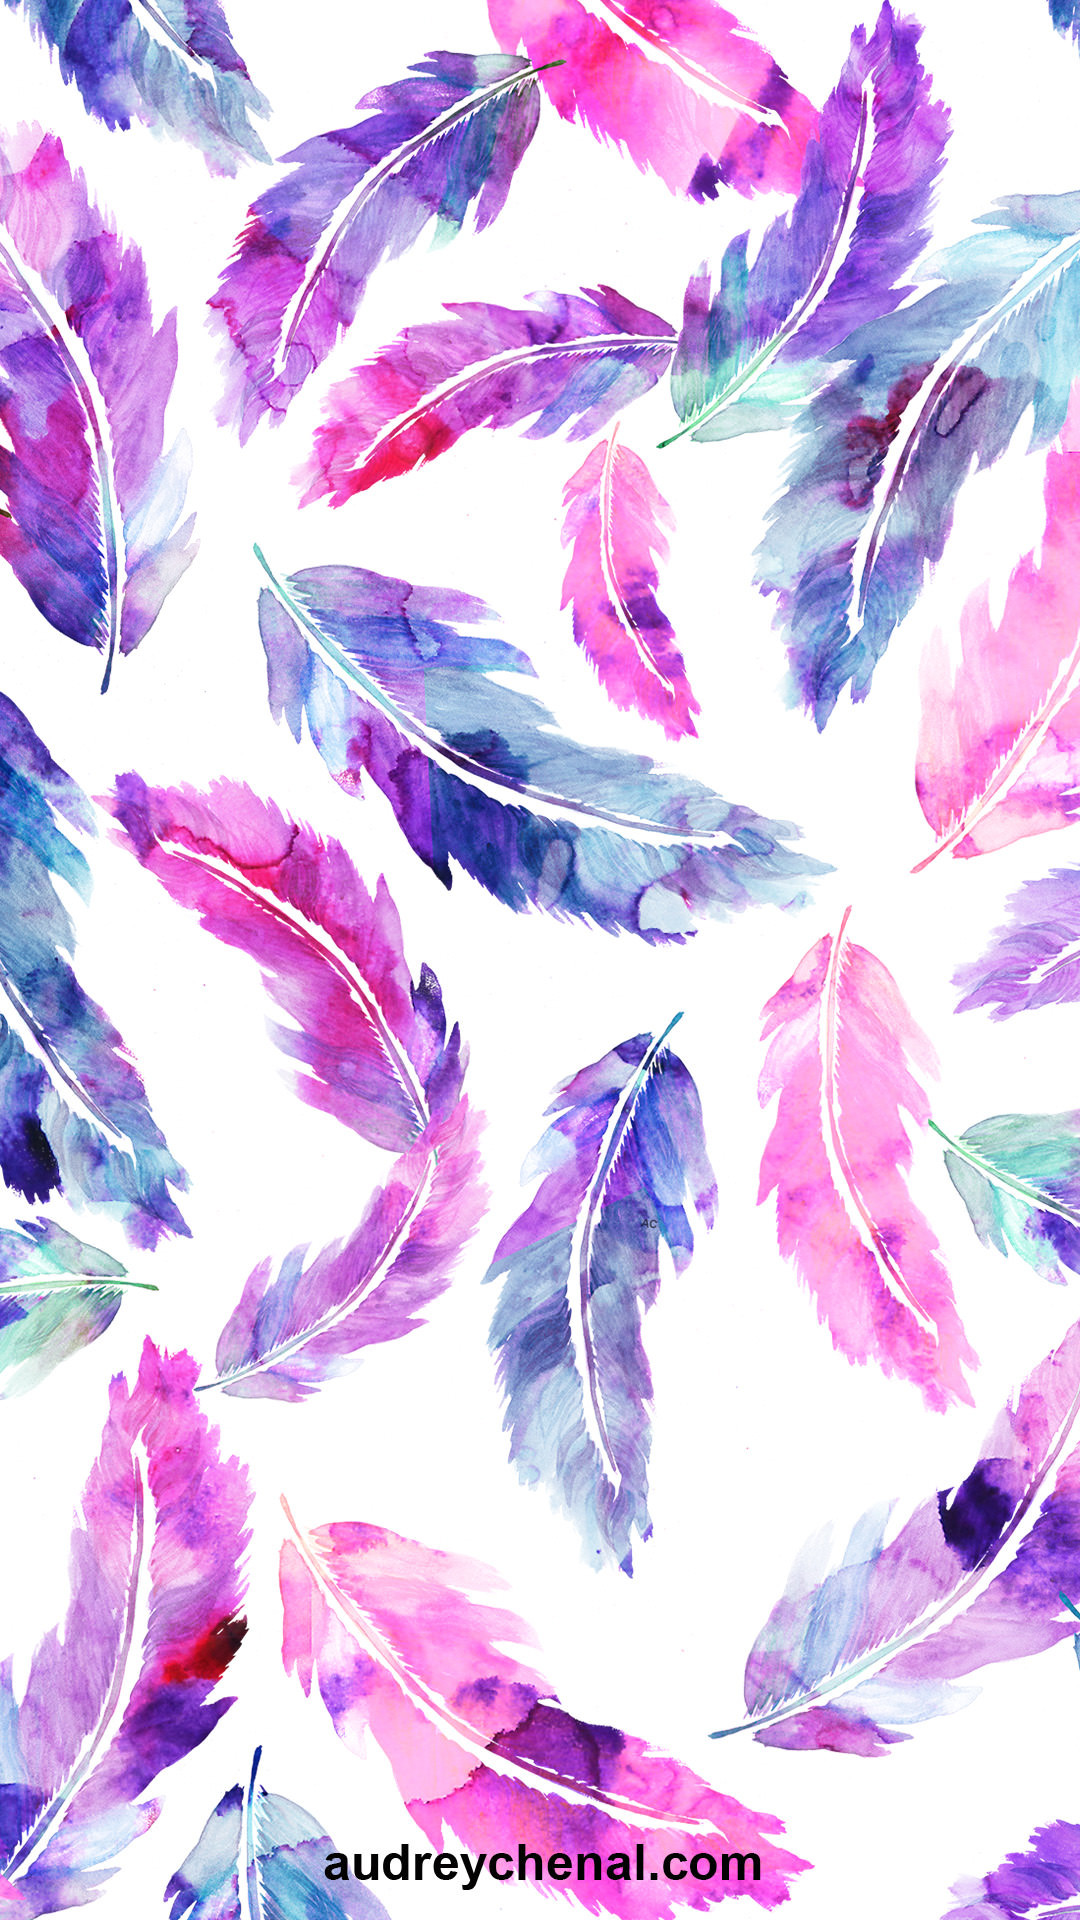 1080x1920 wallpaper Pink purple hand painted watercolor boho feathers pattern by  Audrey Chenal